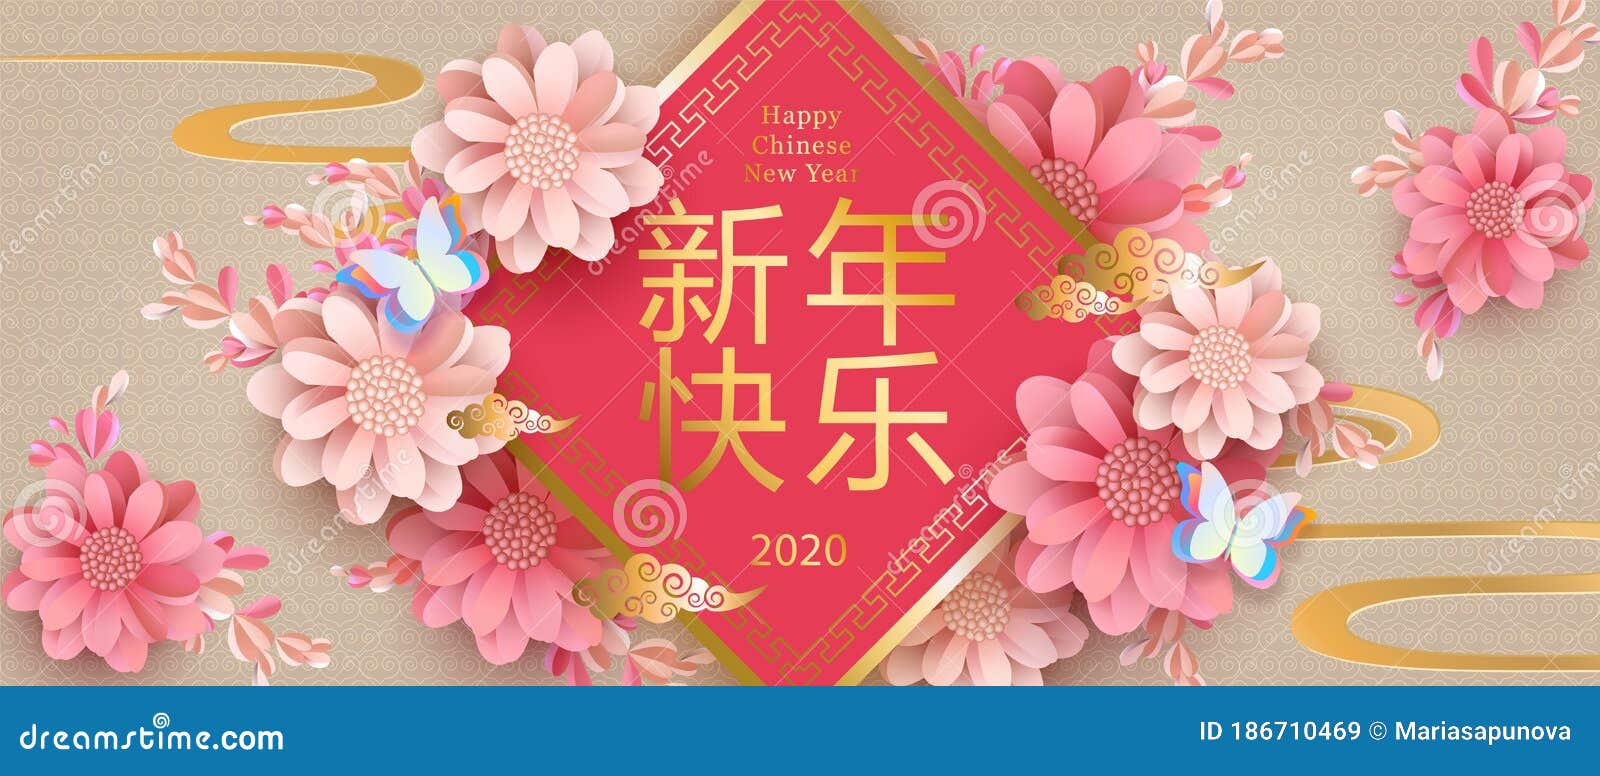 Happy Chinese New Year 2020, Festive Background with 3d Flowers, Butterfly  Stock Vector - Illustration of 2020, decoration: 186710469